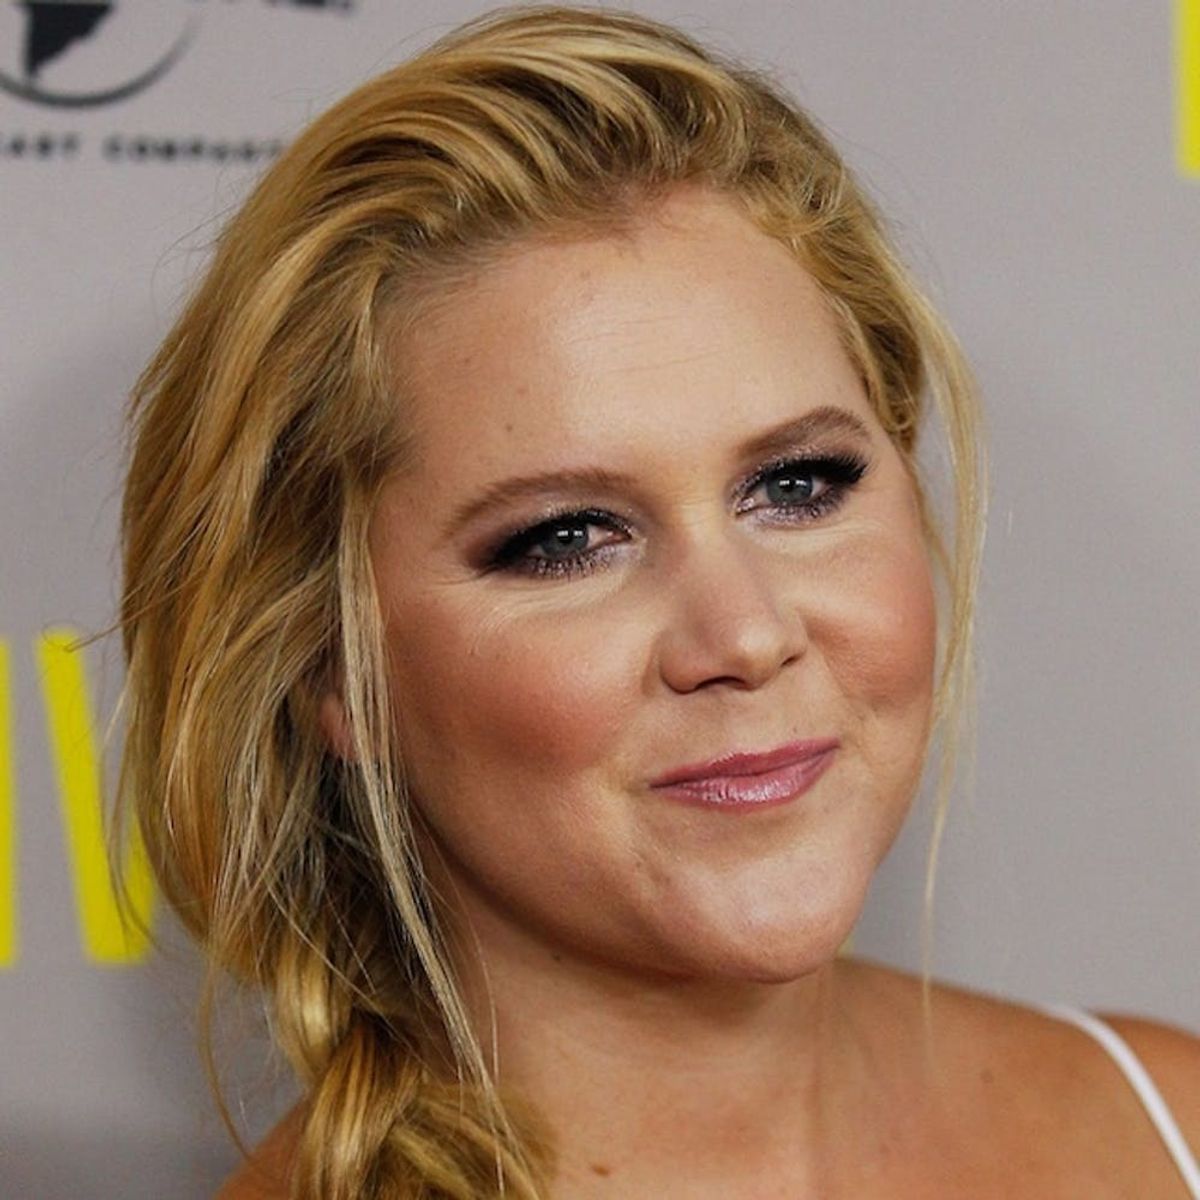 Amy Schumer Was Just the Coolest Wedding Crasher Ever